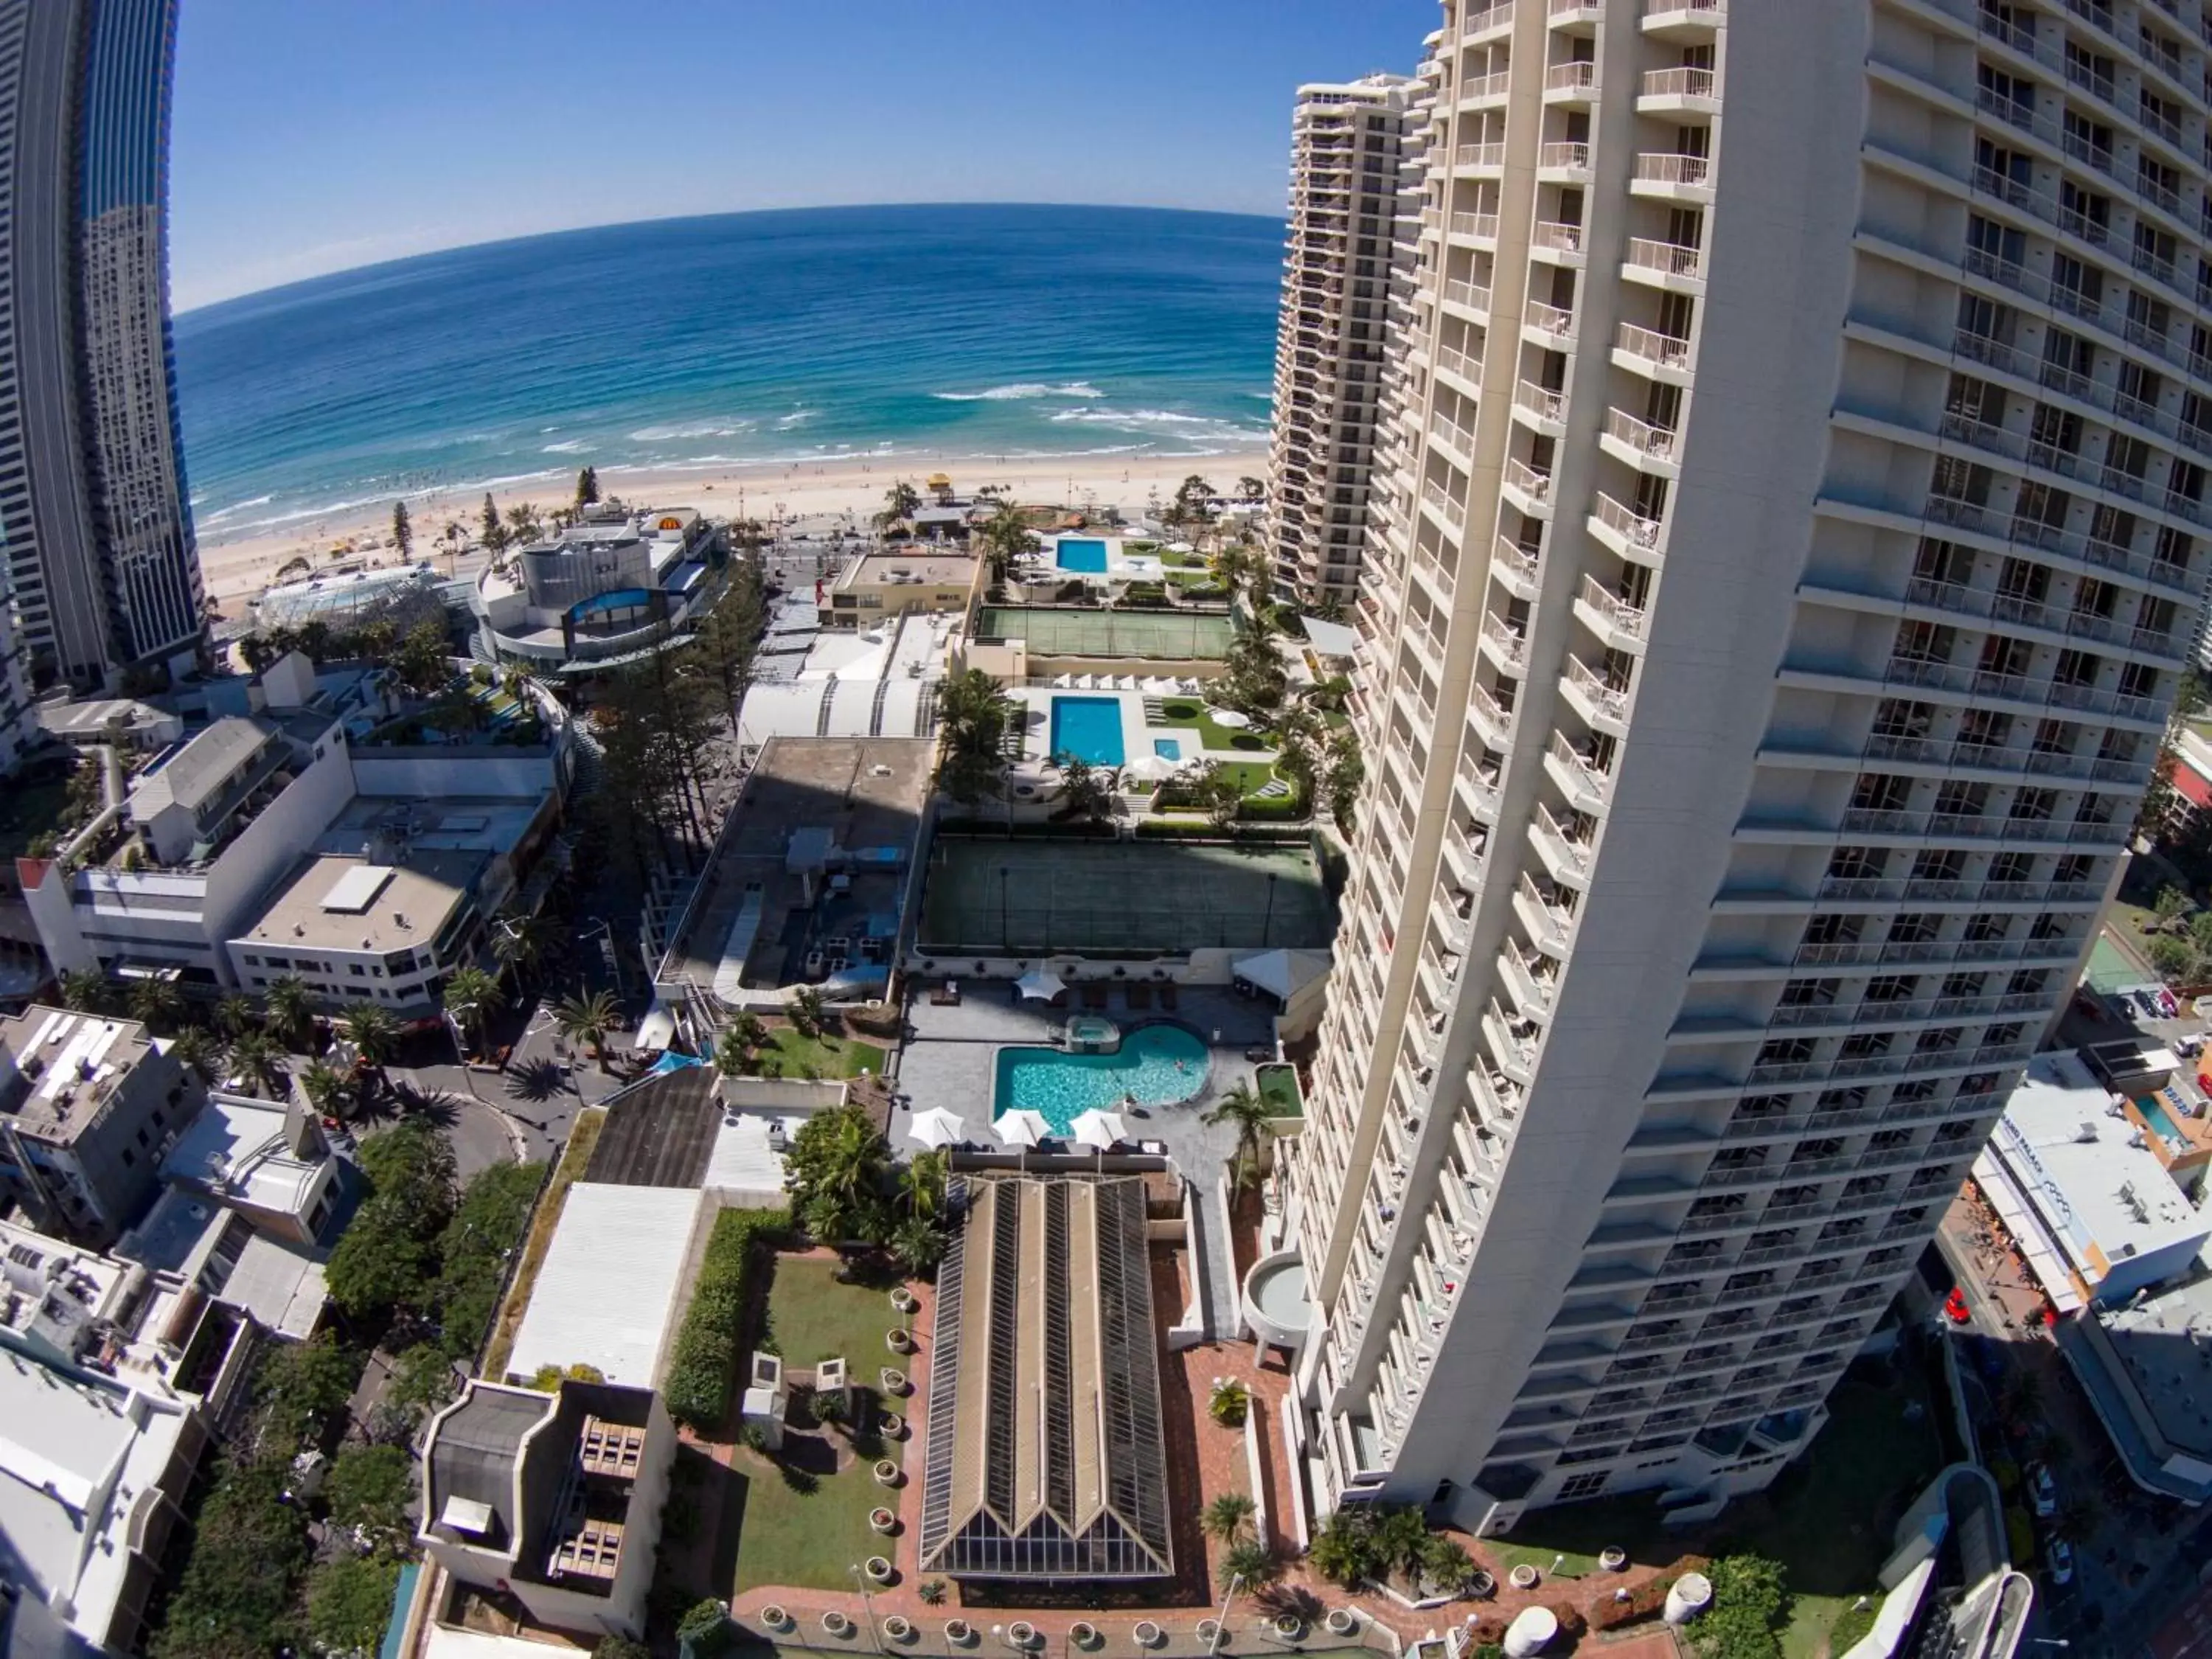 Property building, Bird's-eye View in Novotel Surfers Paradise